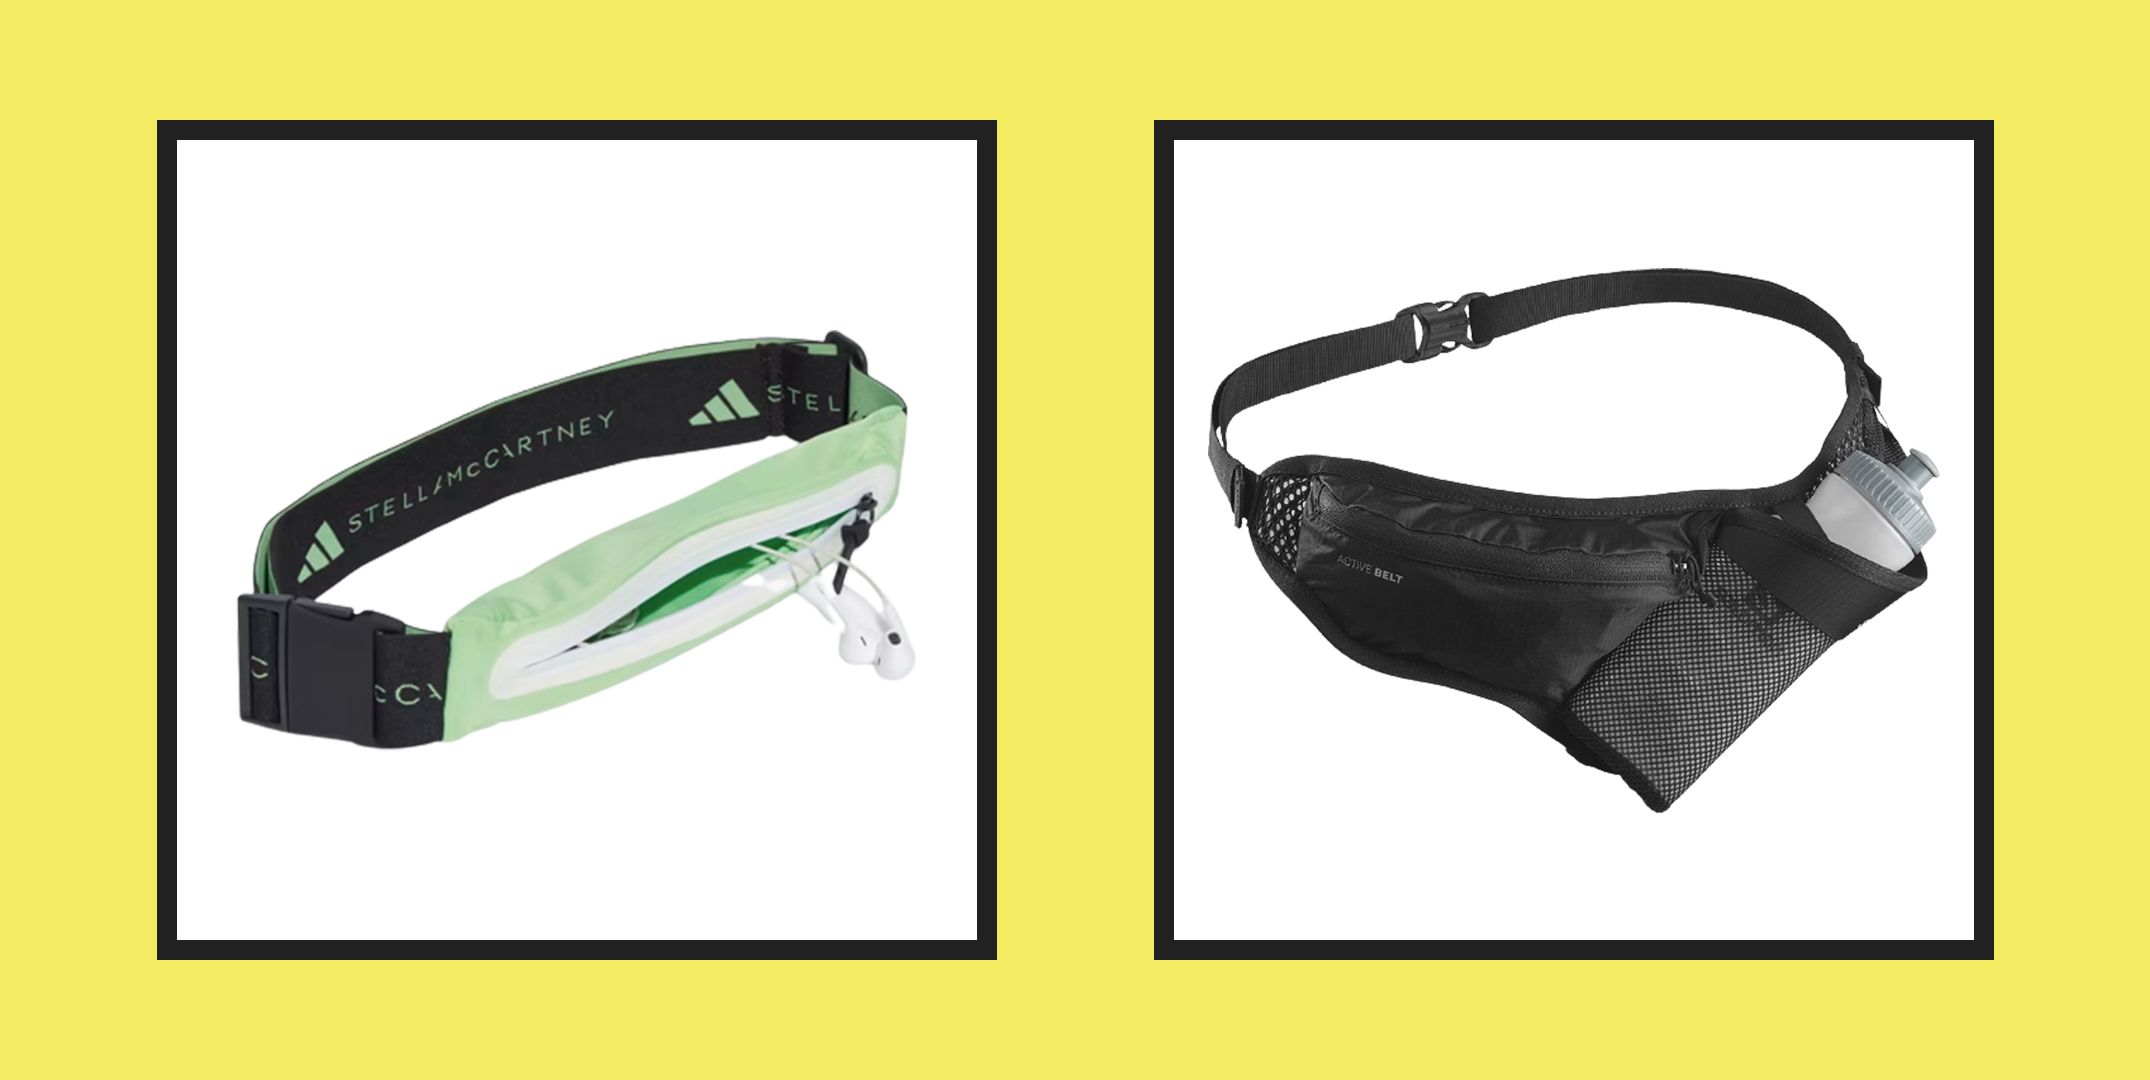 Ultra Light-Weight and Breathable Mesh Rinning Belt